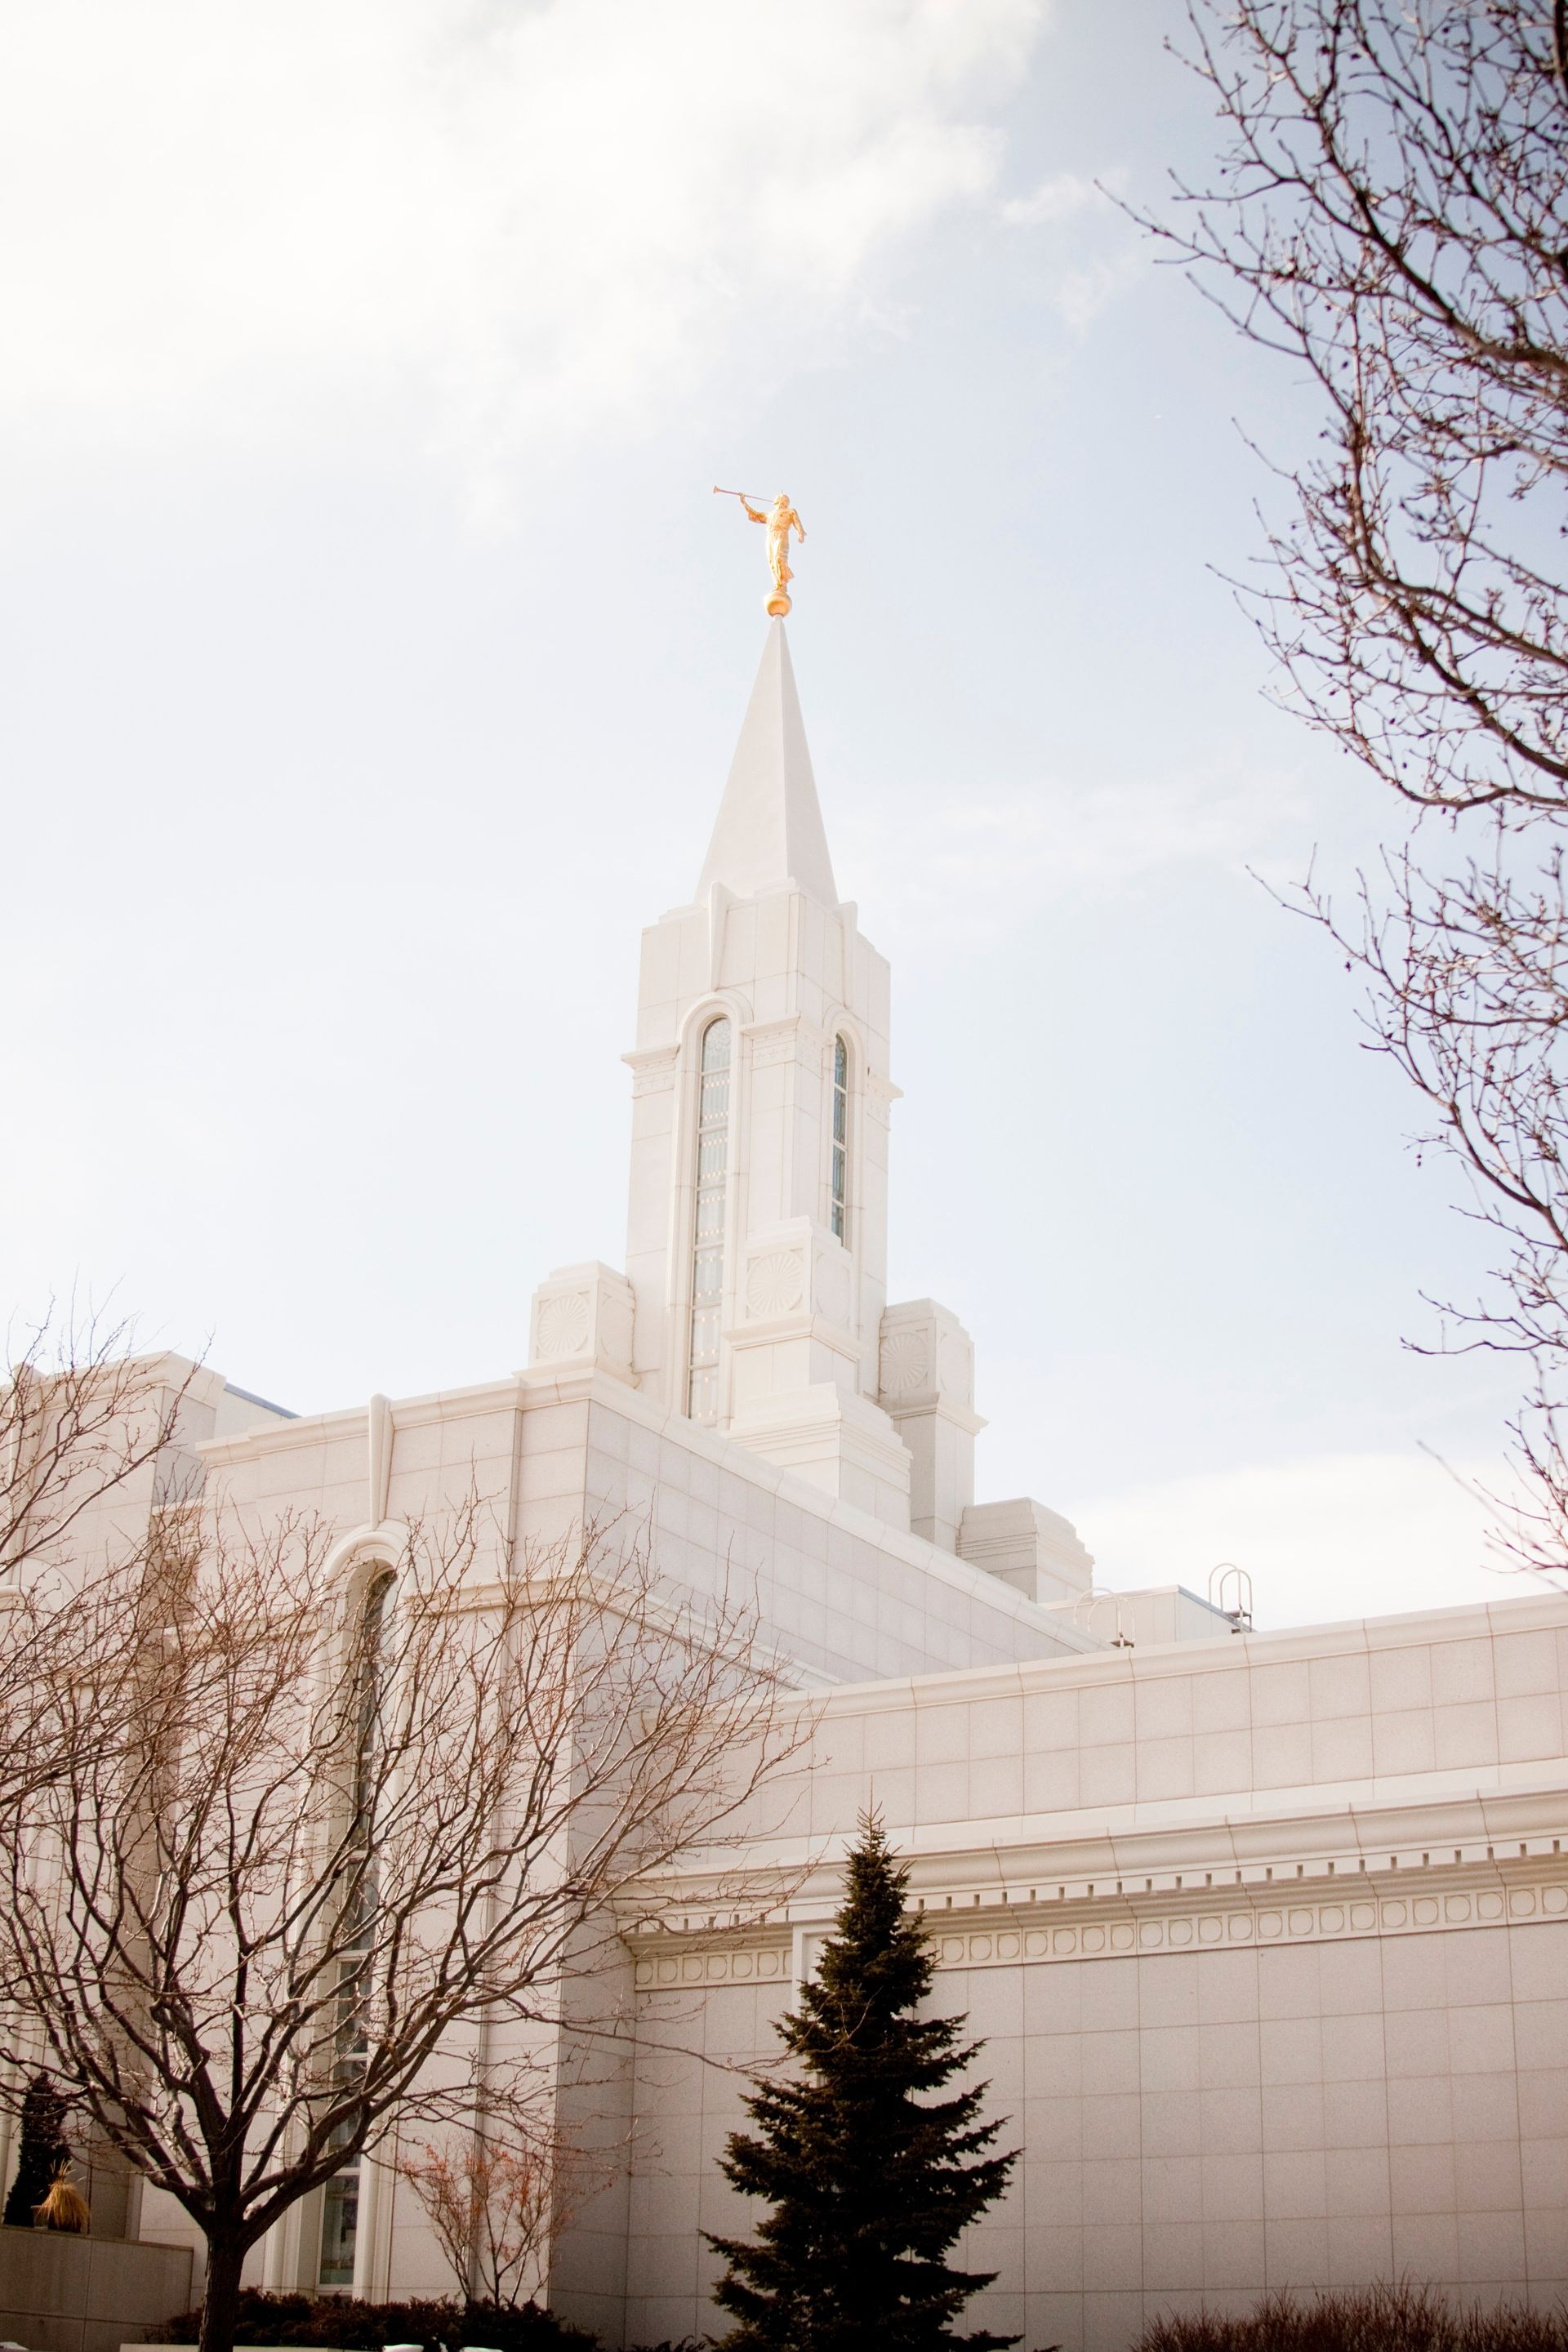 An exterior view of the Bountiful Utah Temple in the winter.  